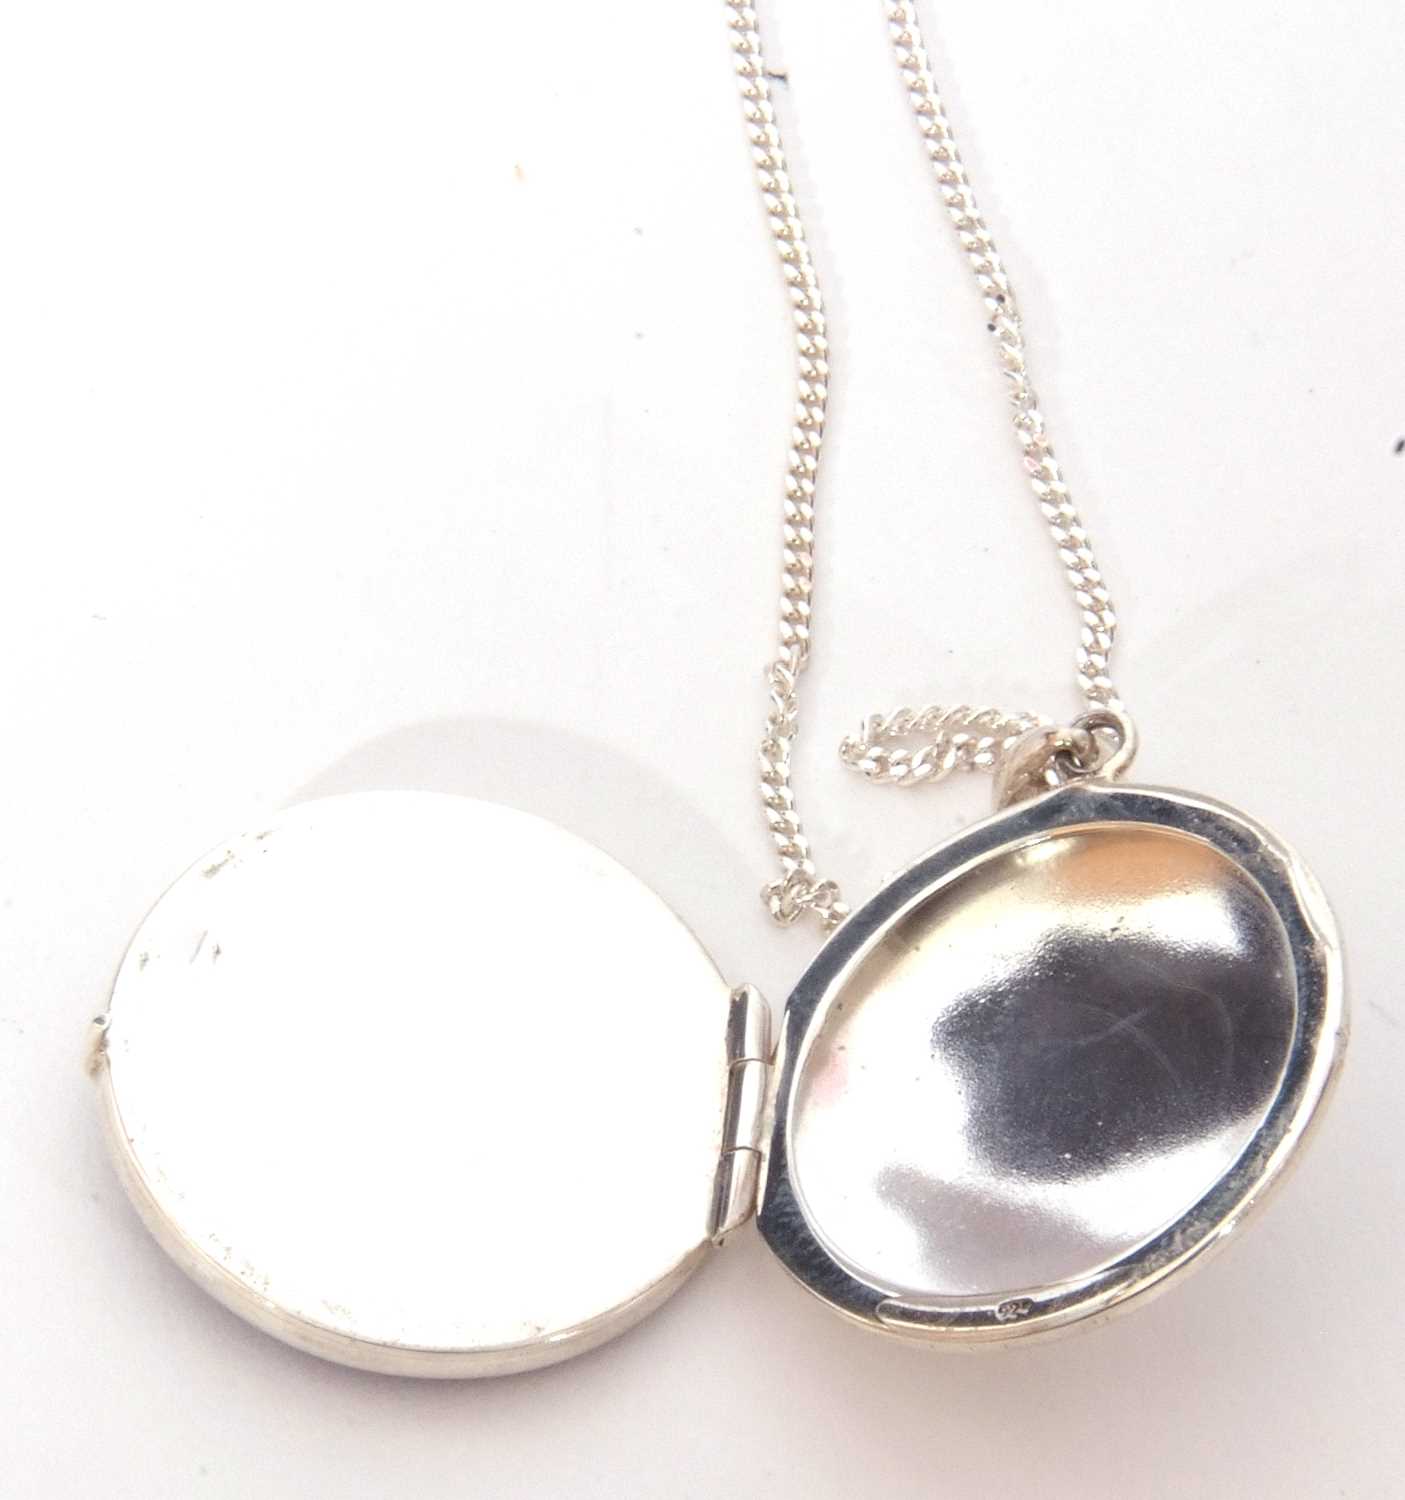 Modern white metal and Blue John hinged locket, 22mm diam, suspended from a 925 marked chain - Image 5 of 6